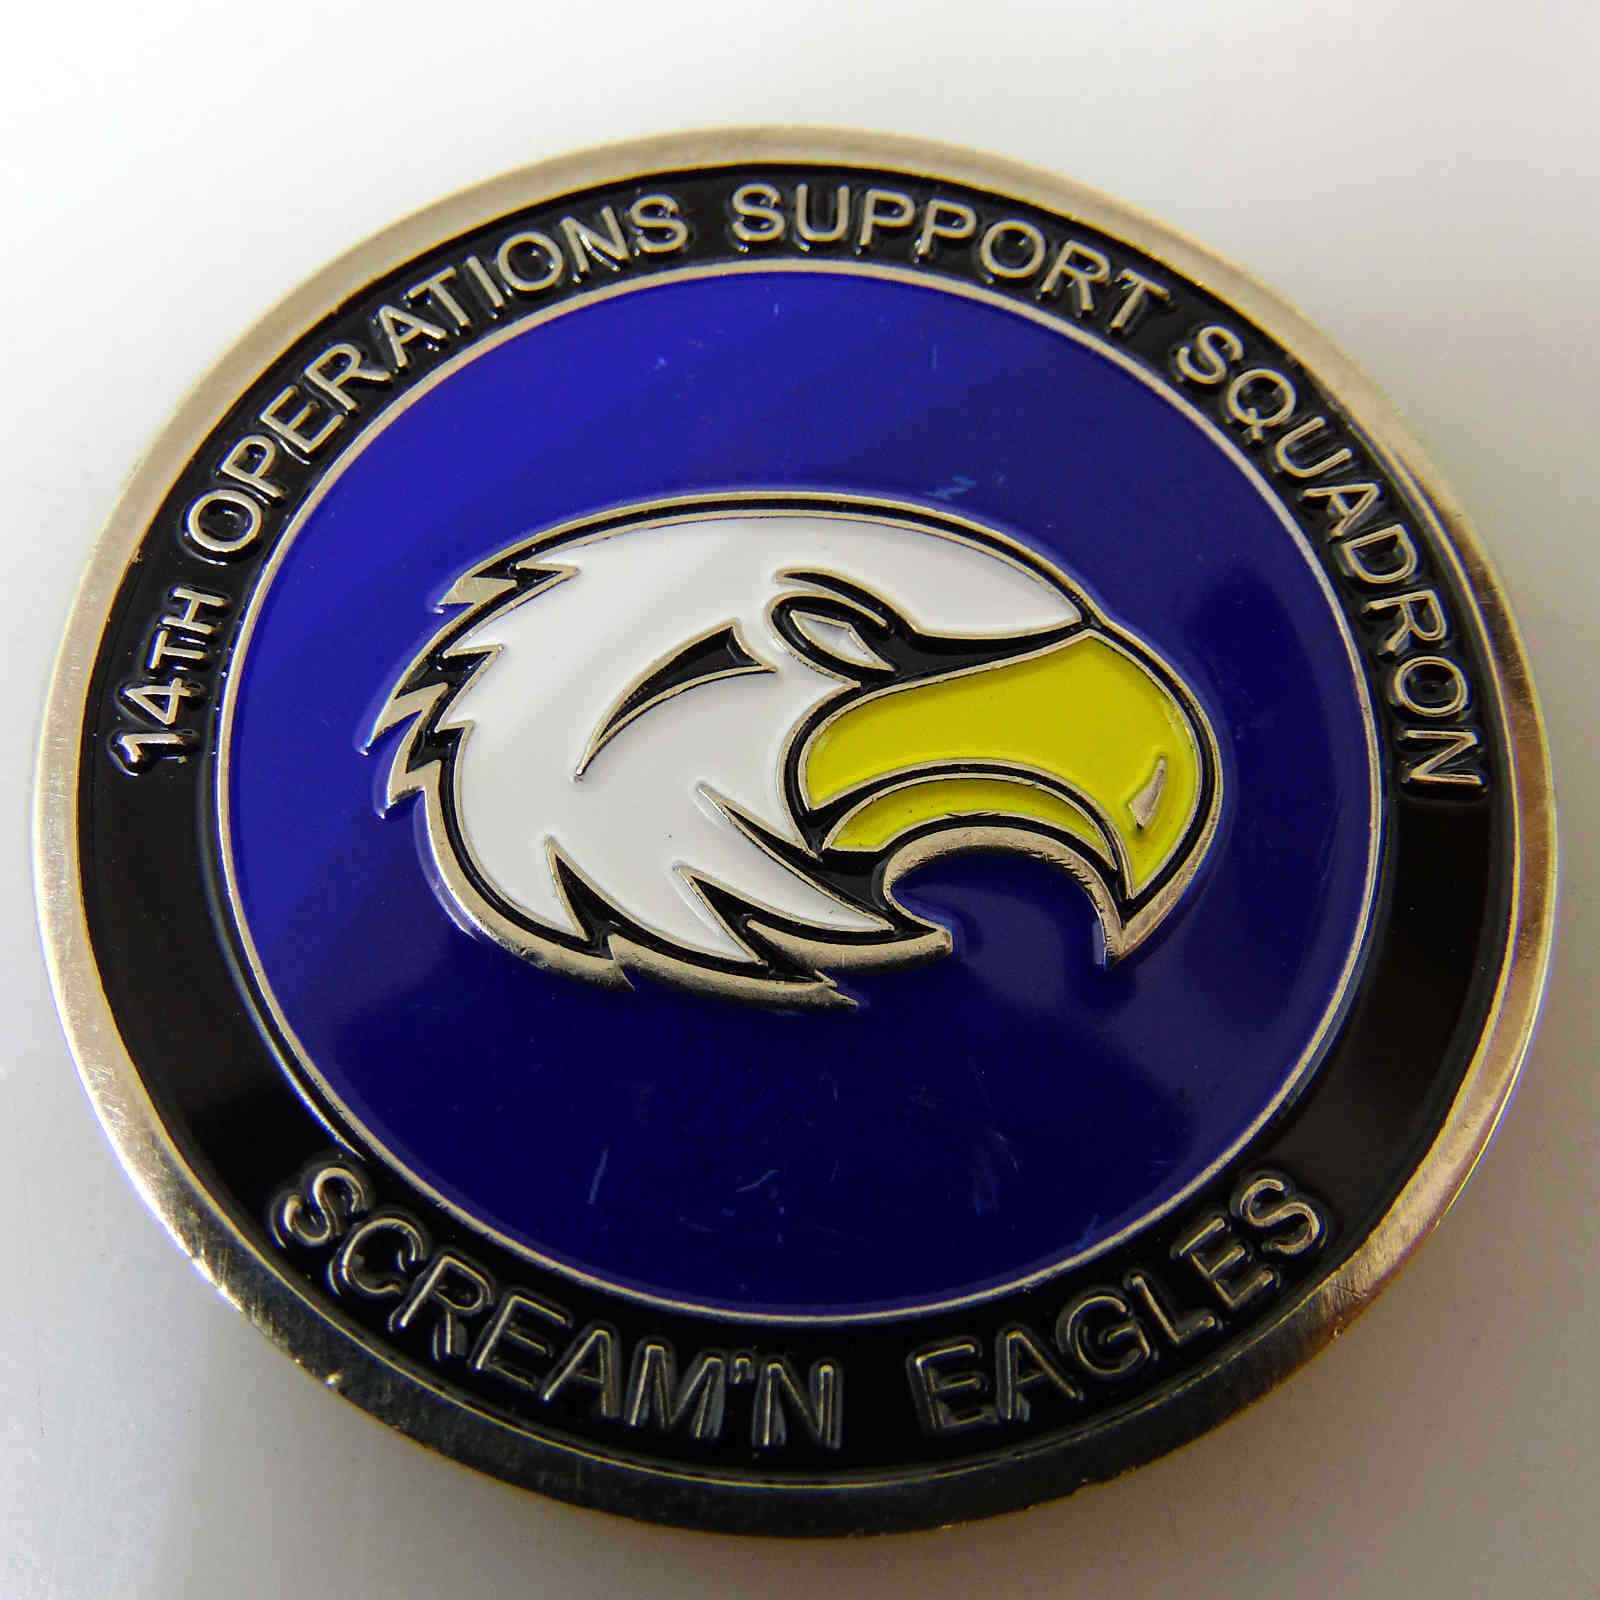 14TH OPERATIONS SUPPORT SQUADRON SCREAM EAGLES SUPPORT TRAINING CHALLENGE COIN